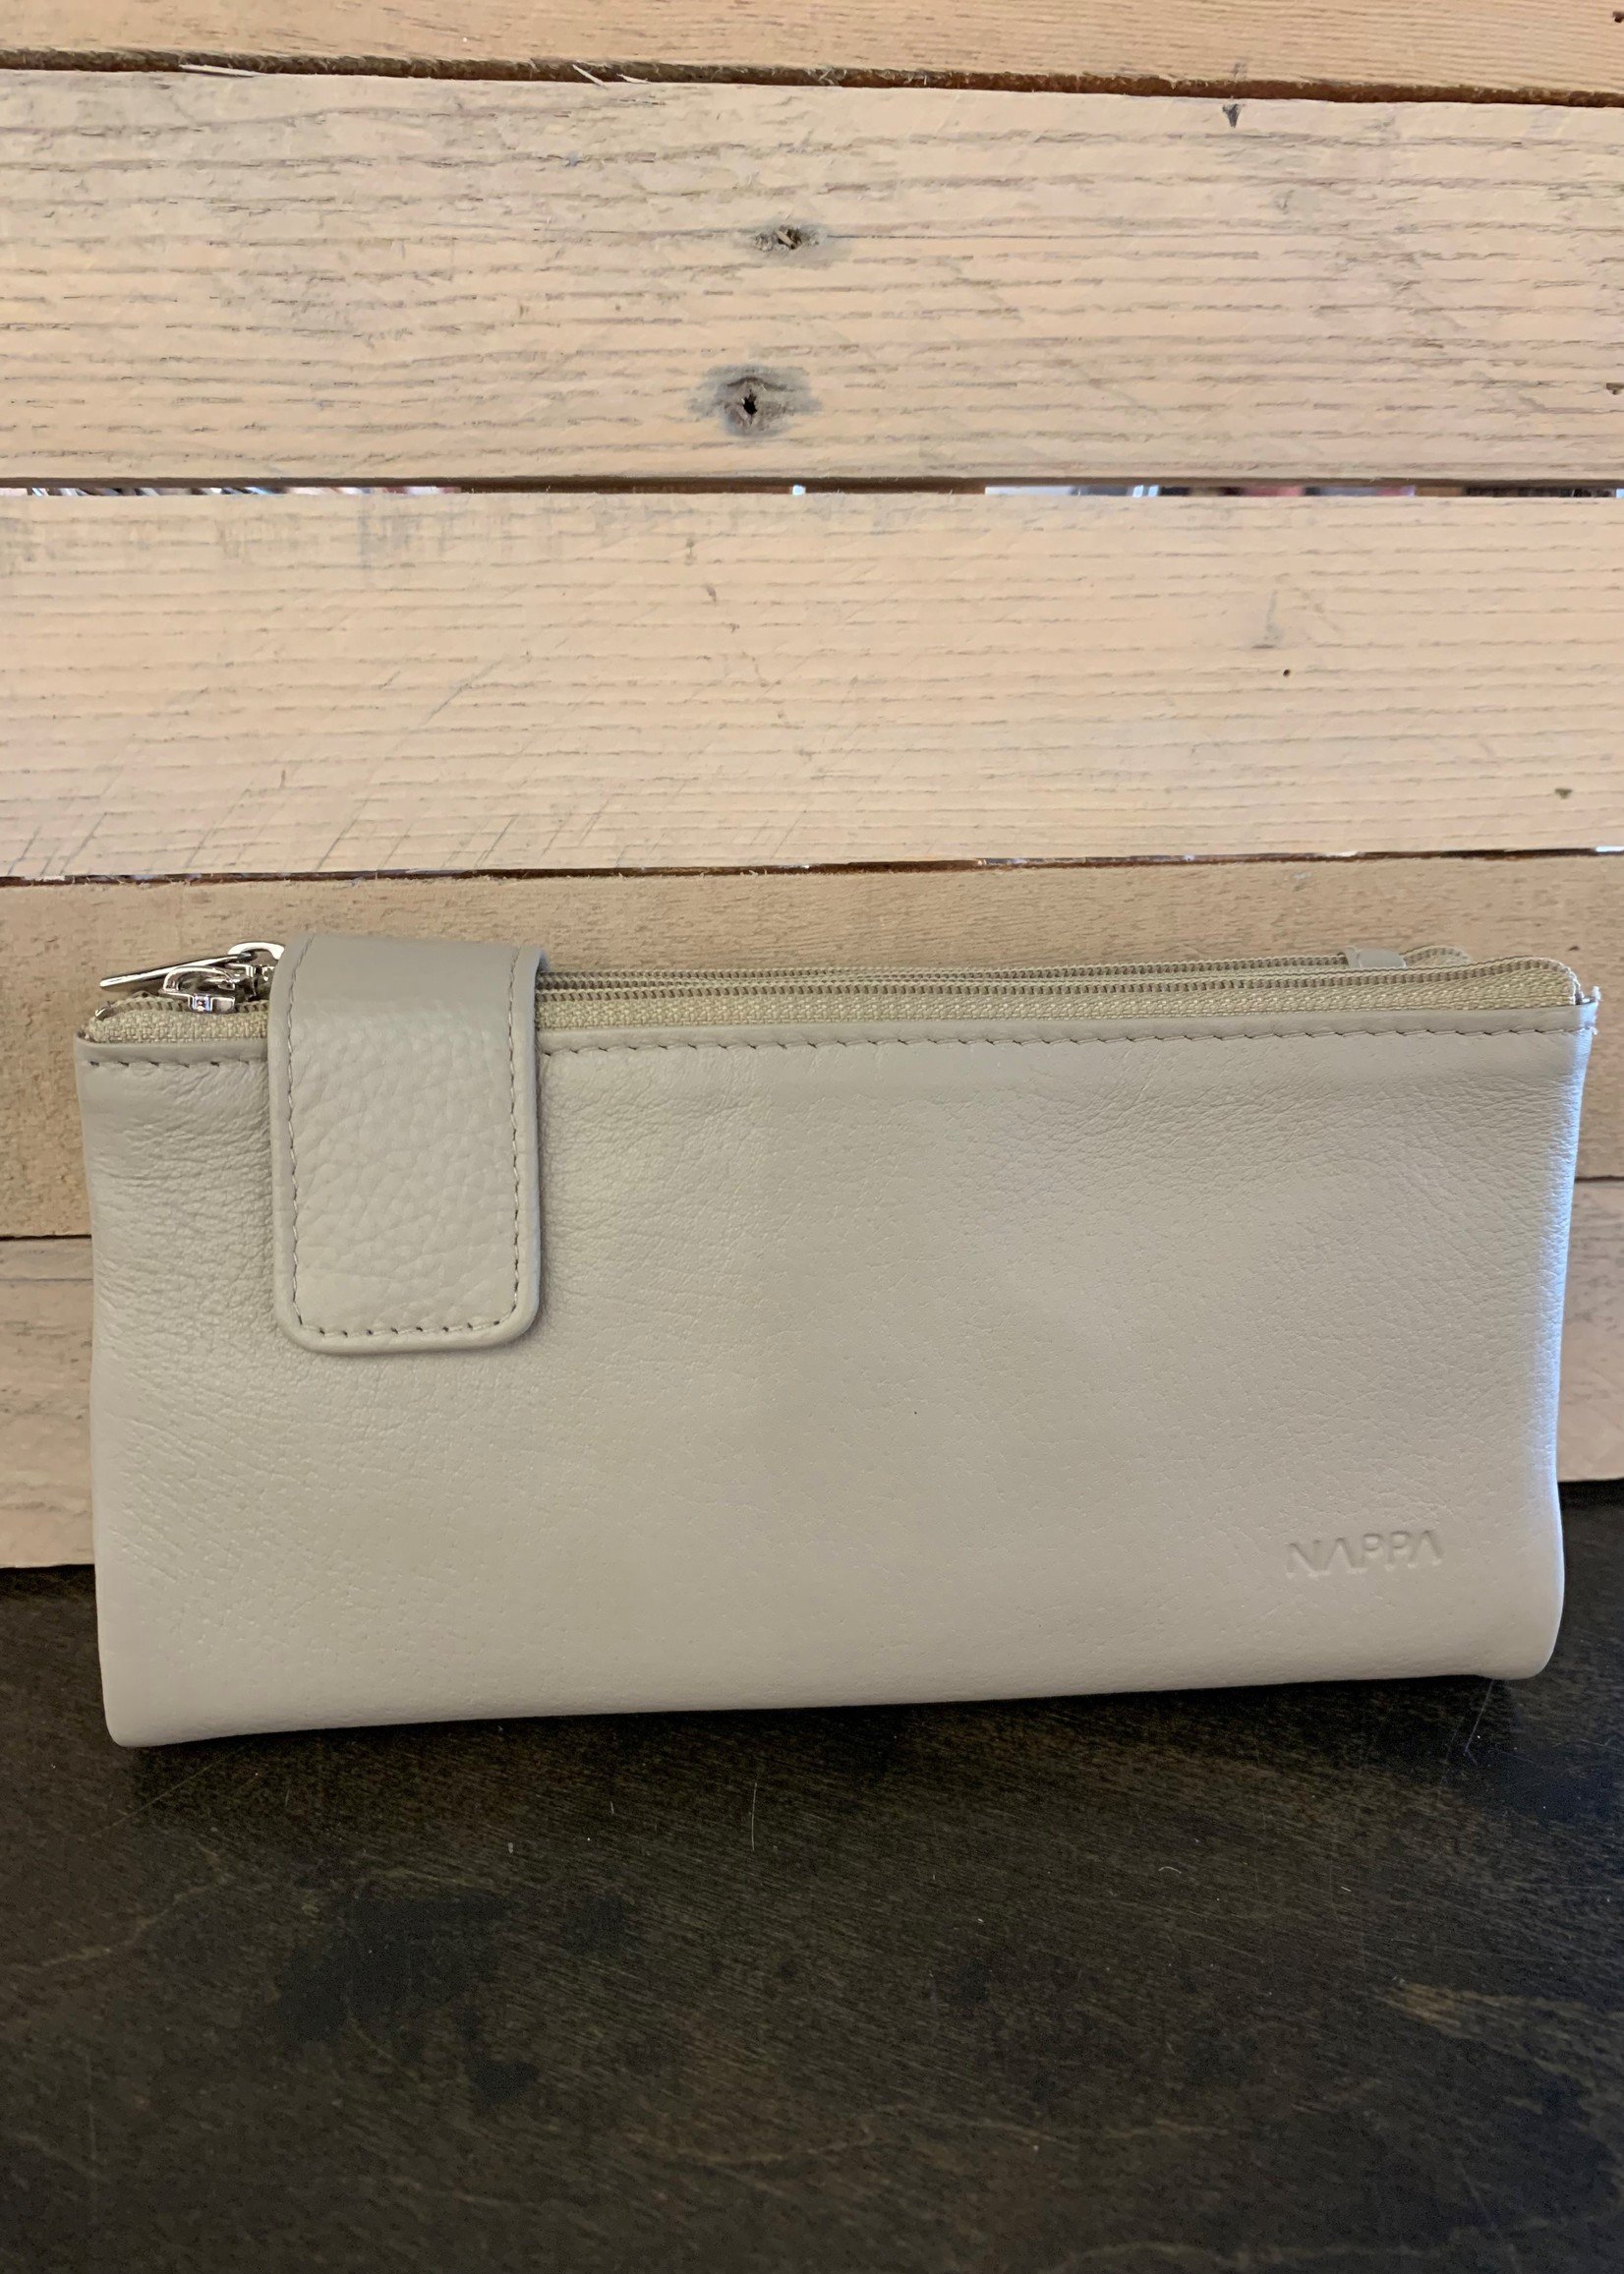 Nappa Evelyn Large Leather Wallet * Taupe